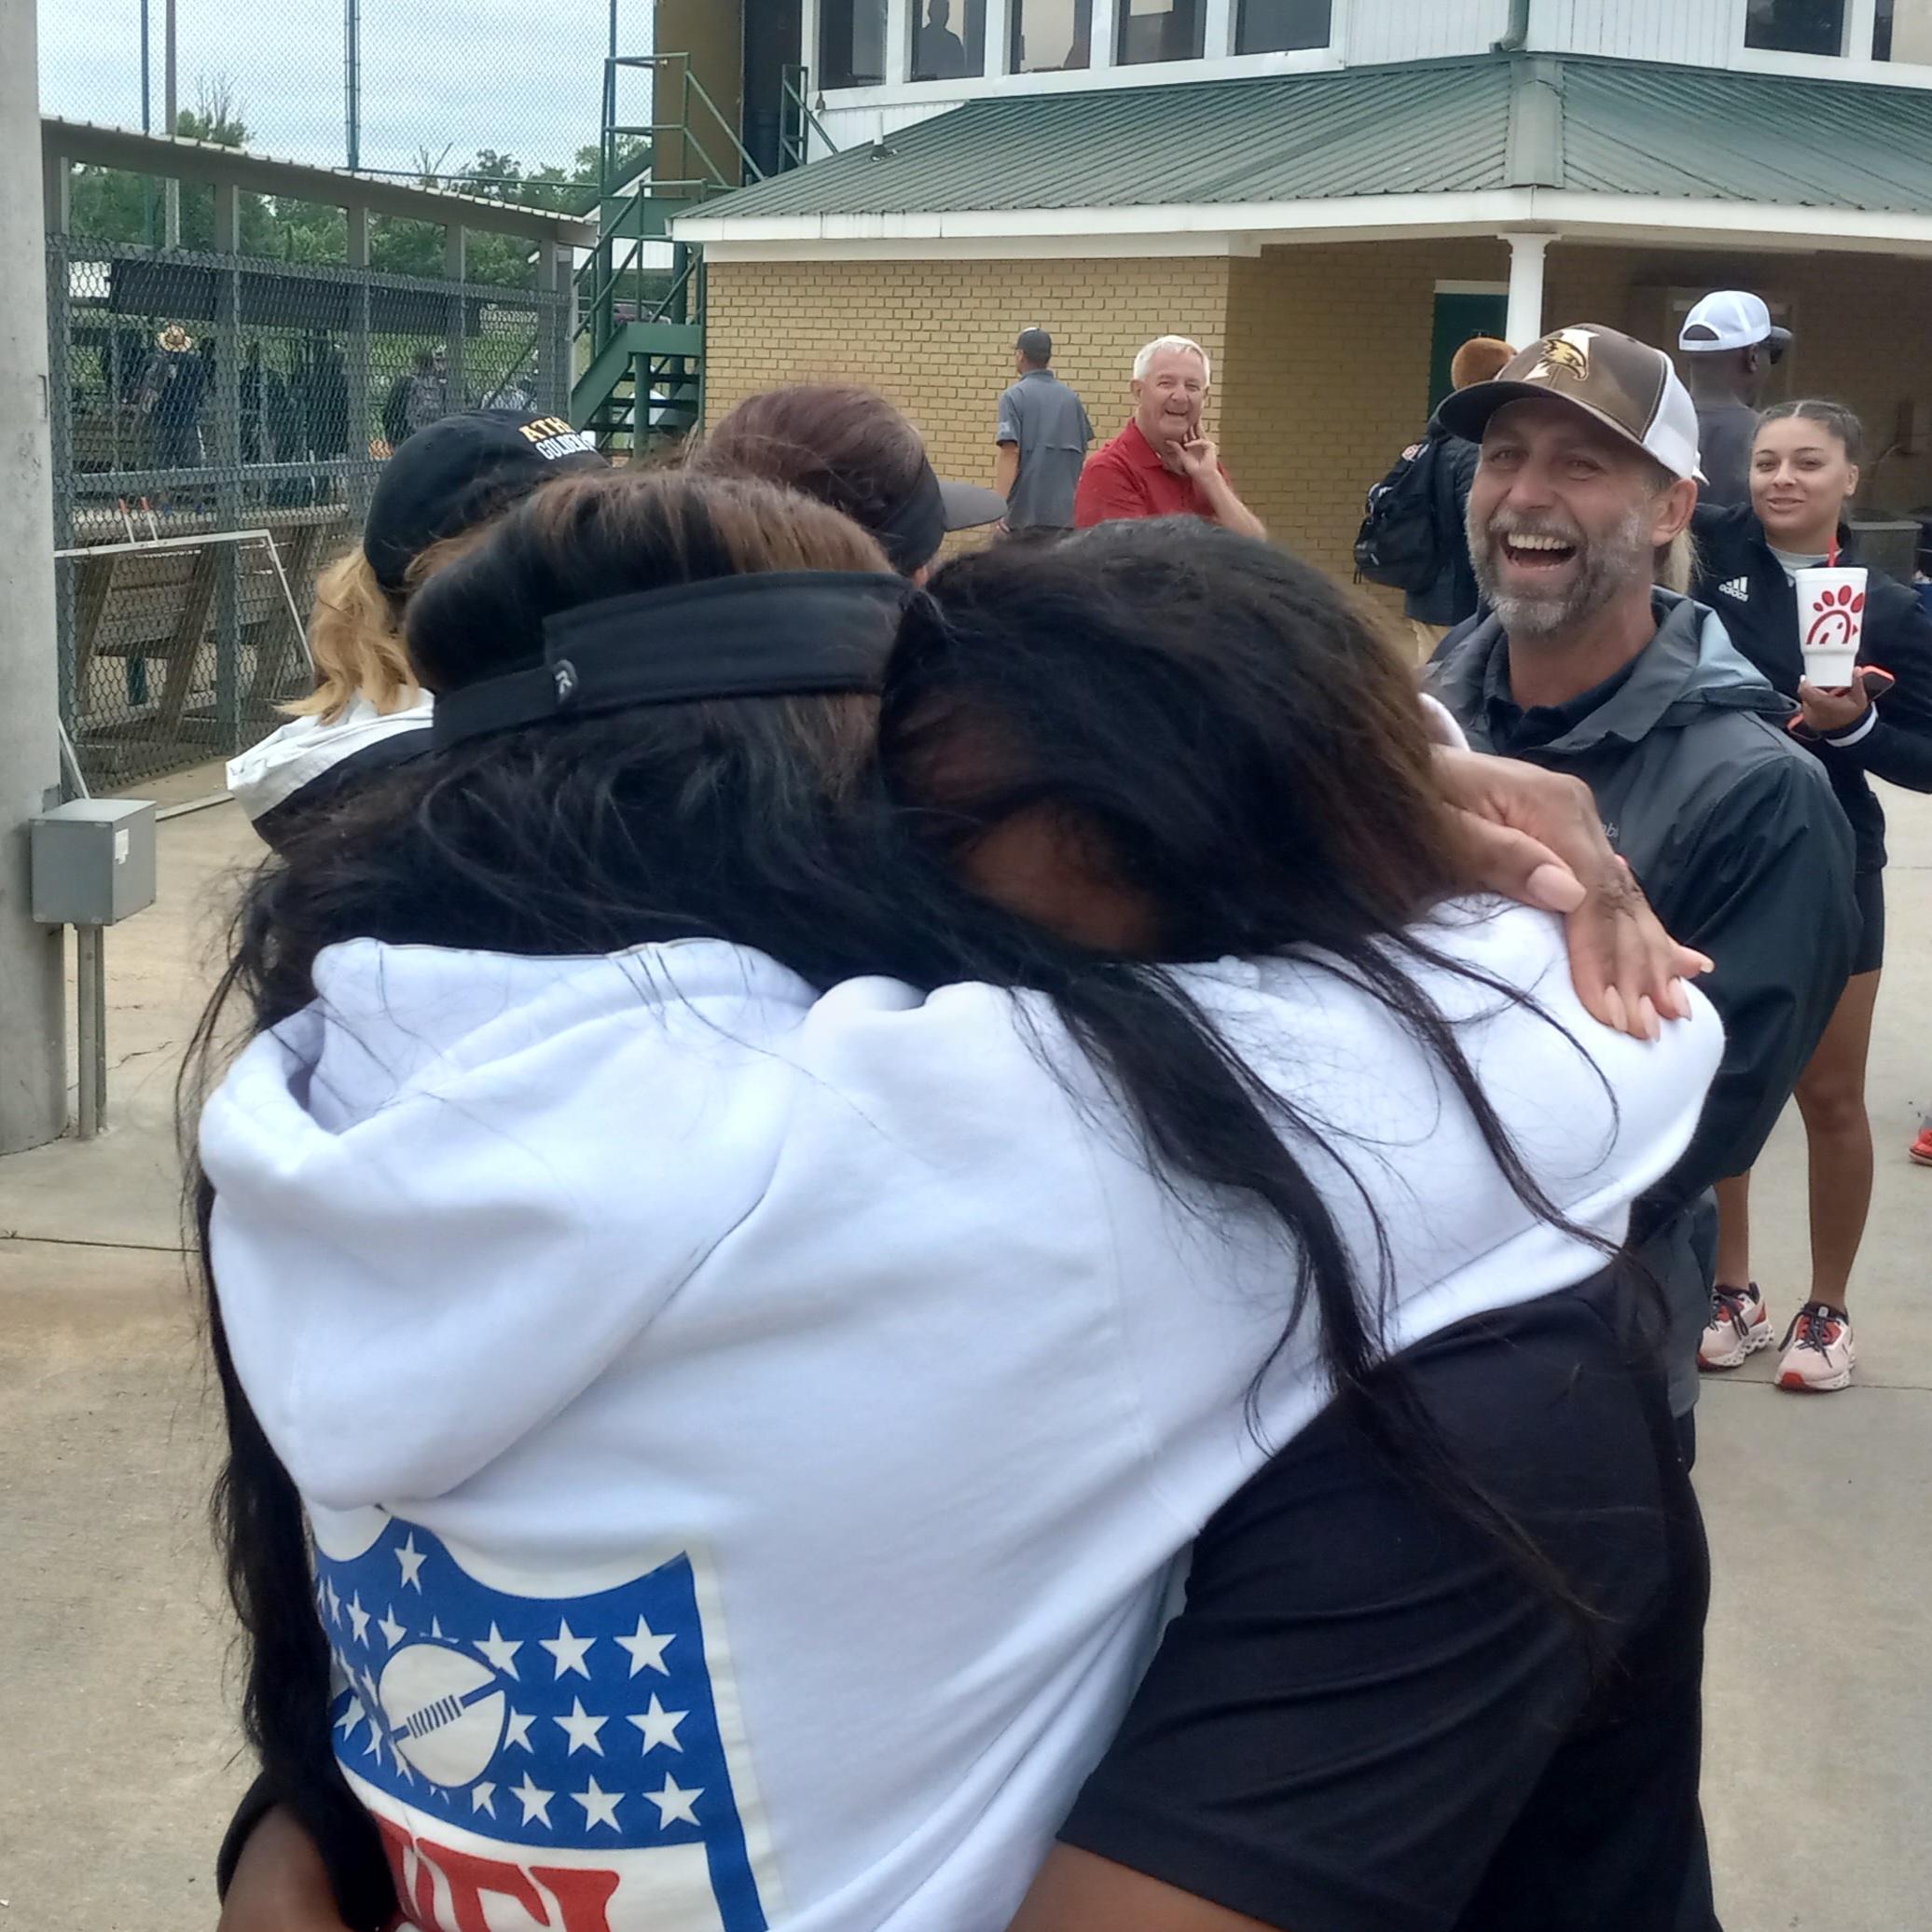 Oxford graduate Trachell Westbrook Kidd (left) hugs her daughter after Kristin Kidd hit a walk-off home run against her alma mater in Friday’s state-tournament action at Oxford Lake. (Photo by Joe Medley)